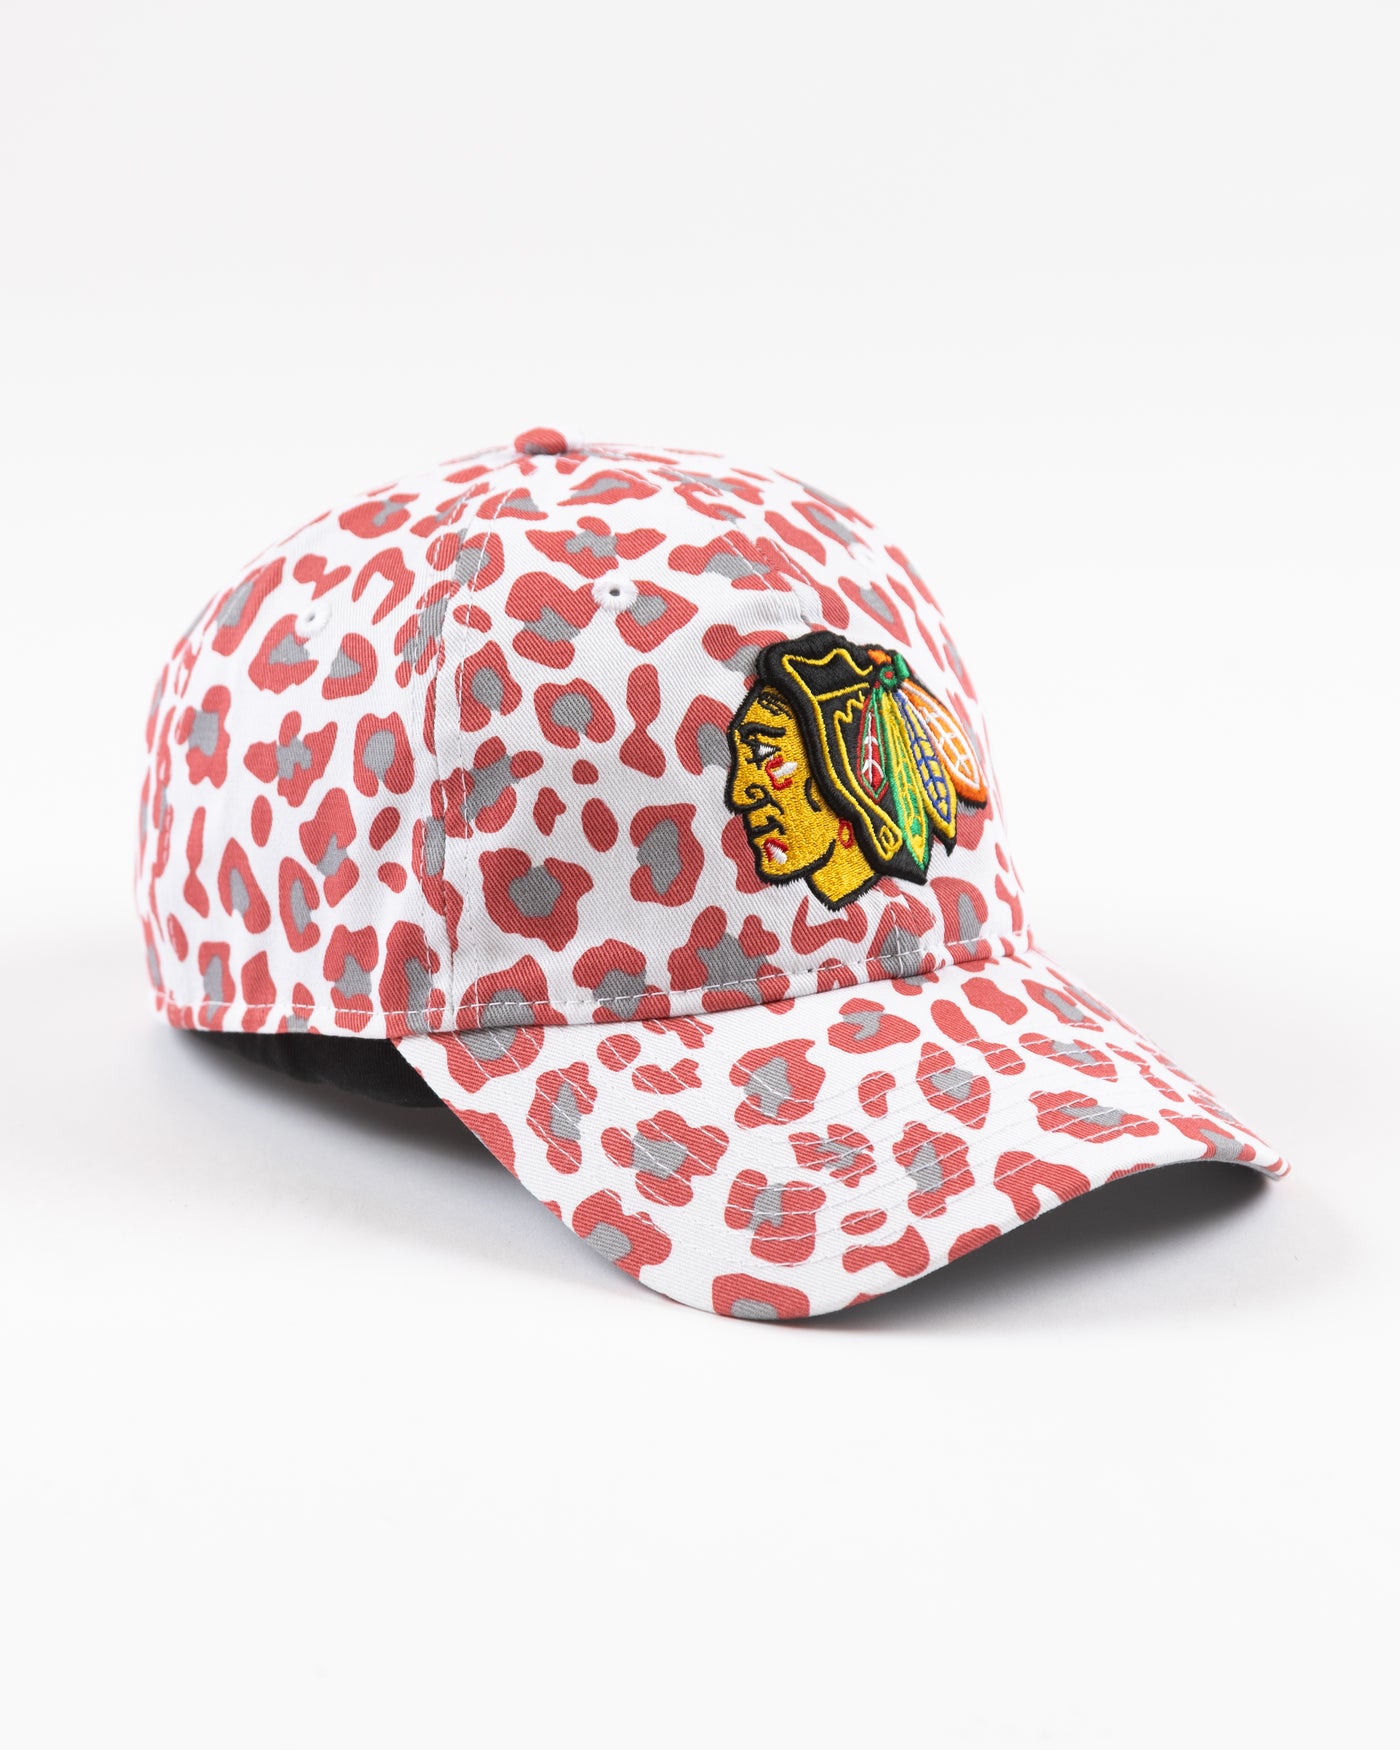 white New Era women's cap with all over pink cheetah print and Chicago Blackhawks primary logo on front - right angle lay flat